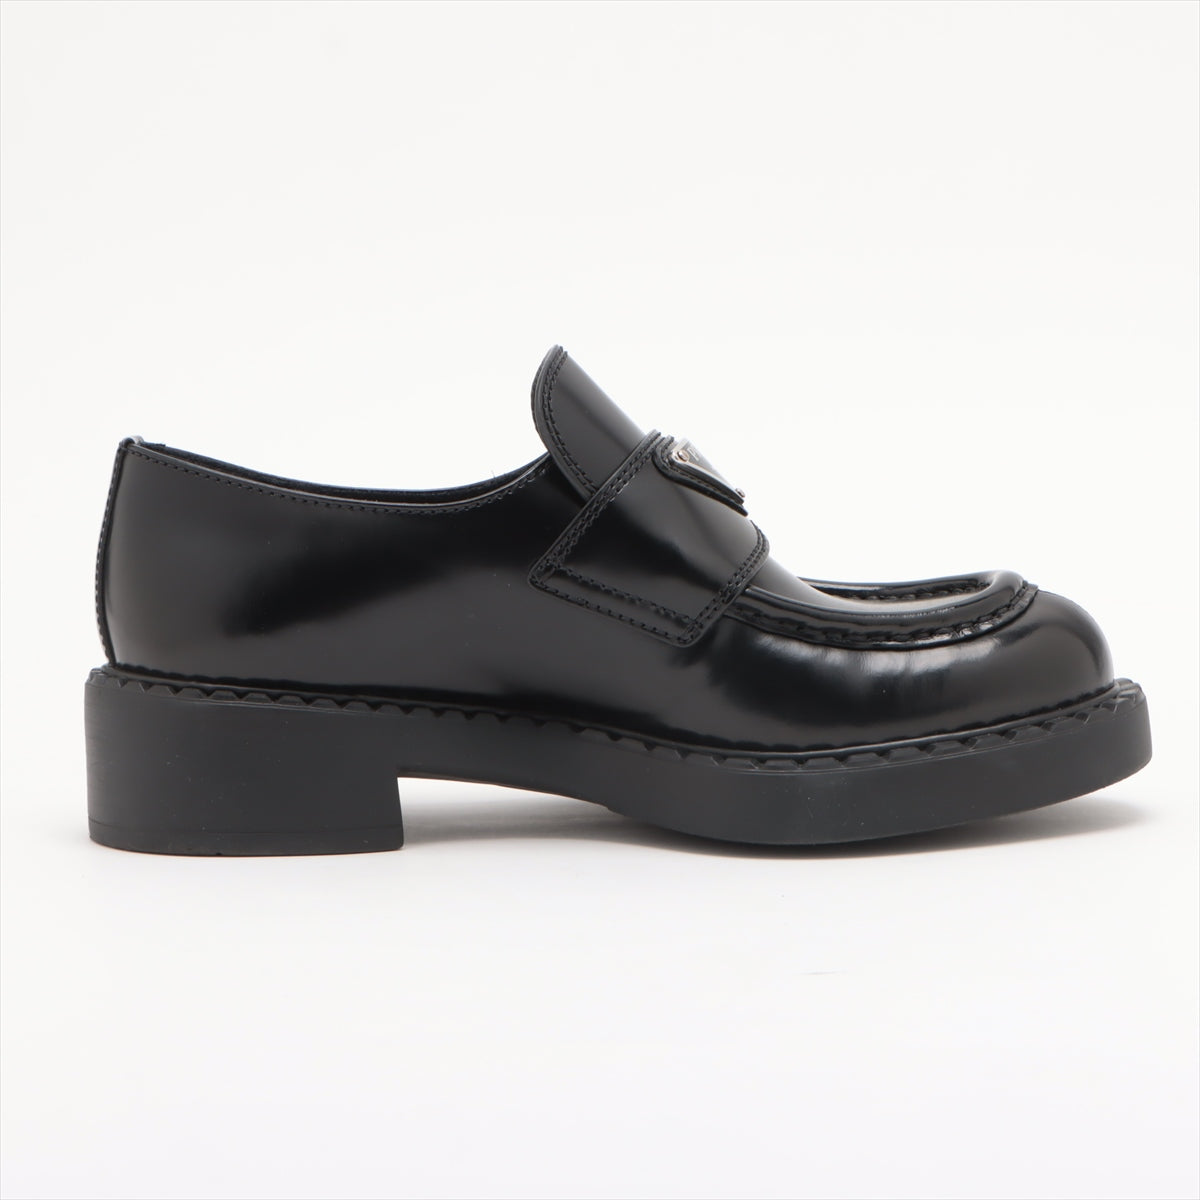 Prada Chocolate Leather Loafer 34 1/2 Ladies' Black Triangle logo There is a box